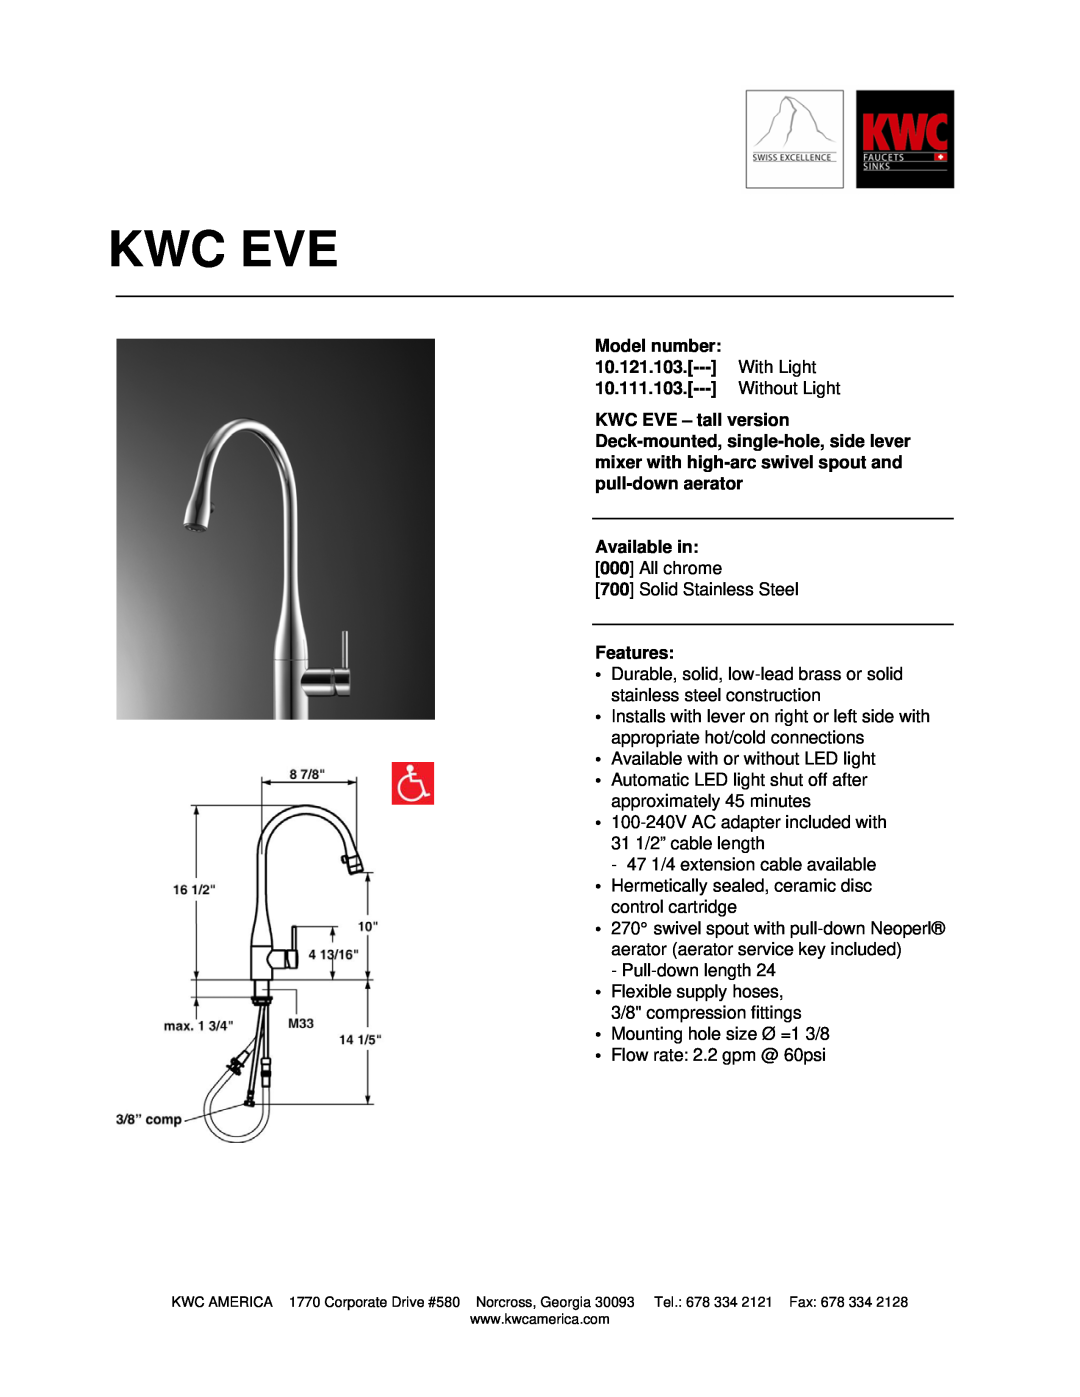 KWC 10.111.103 manual Kwc Eve, Model number, 10.121.103, With Light, Without Light, Available in, Features 